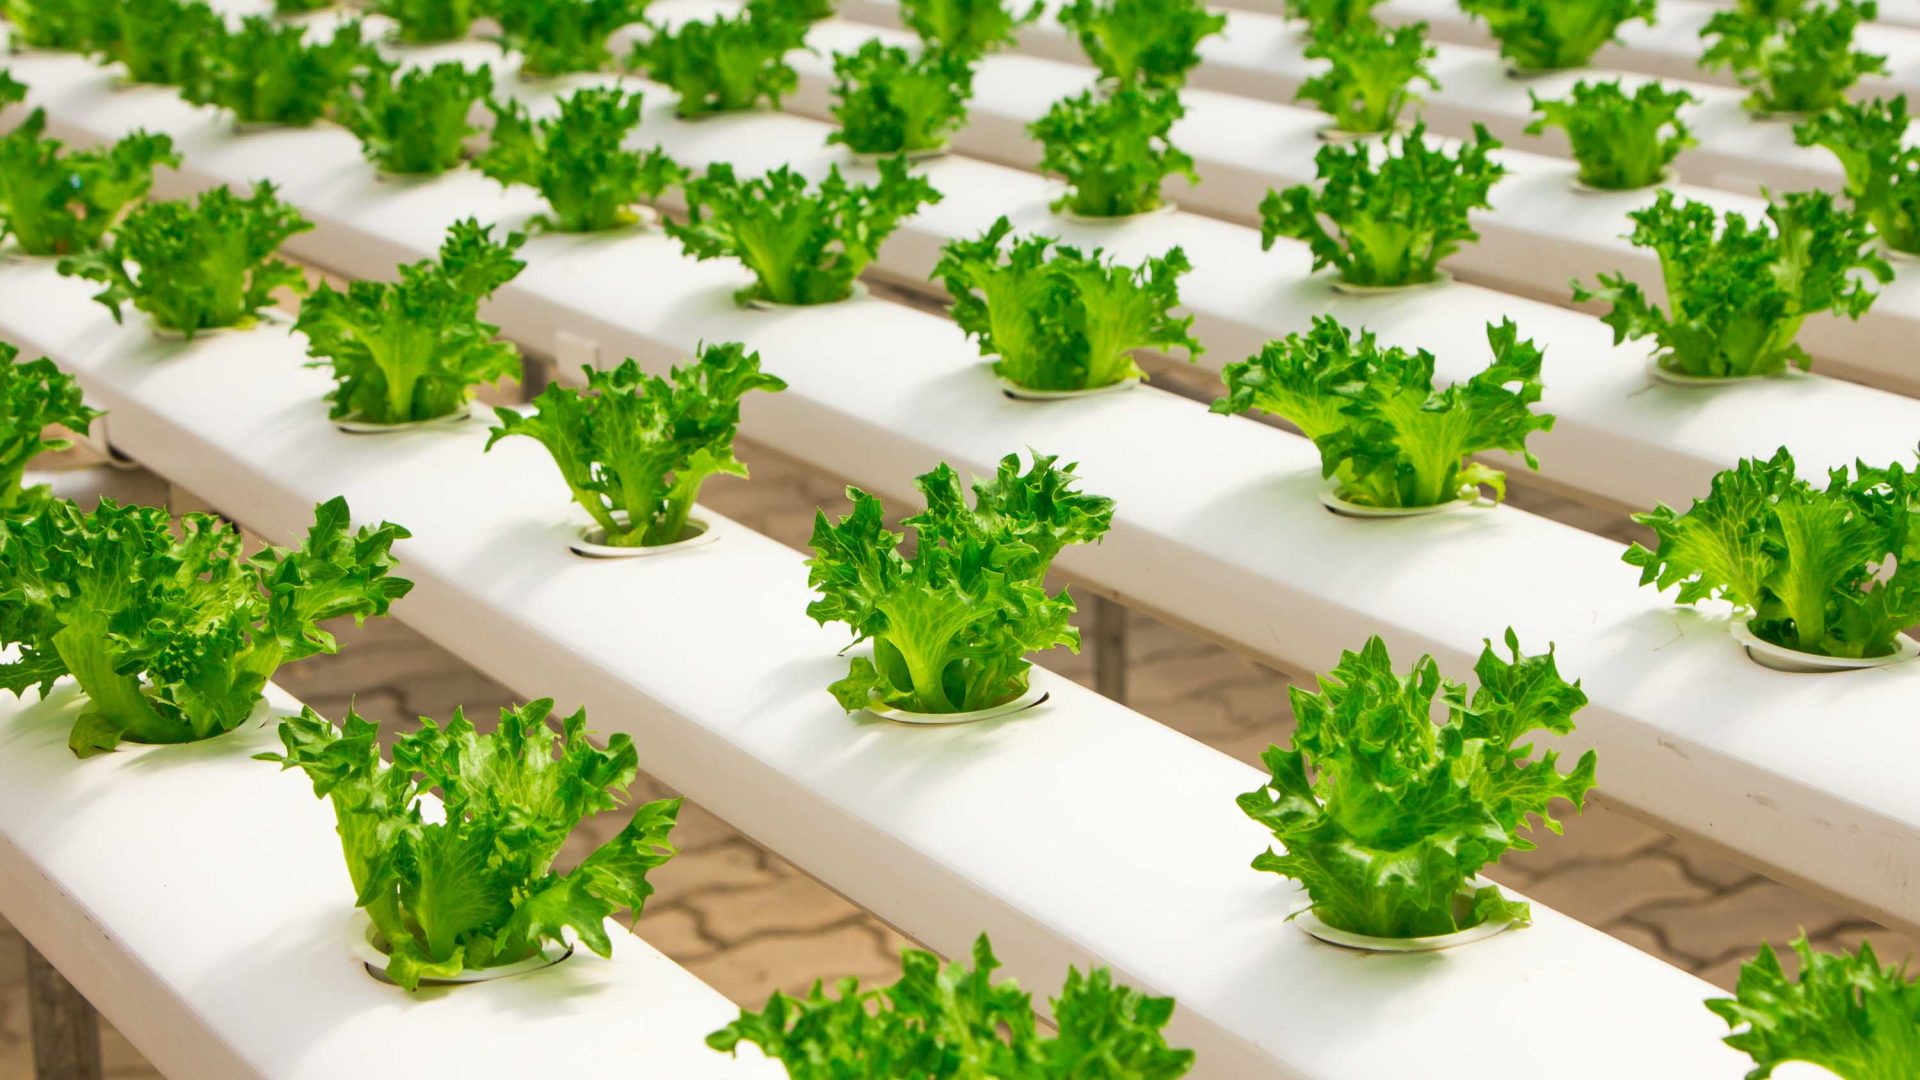 Rows of lettuce growing in hydroponic conditions.